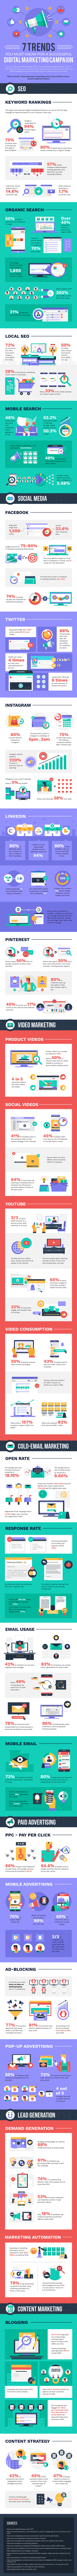 Infographic on Digital Marketing Trends for 2019